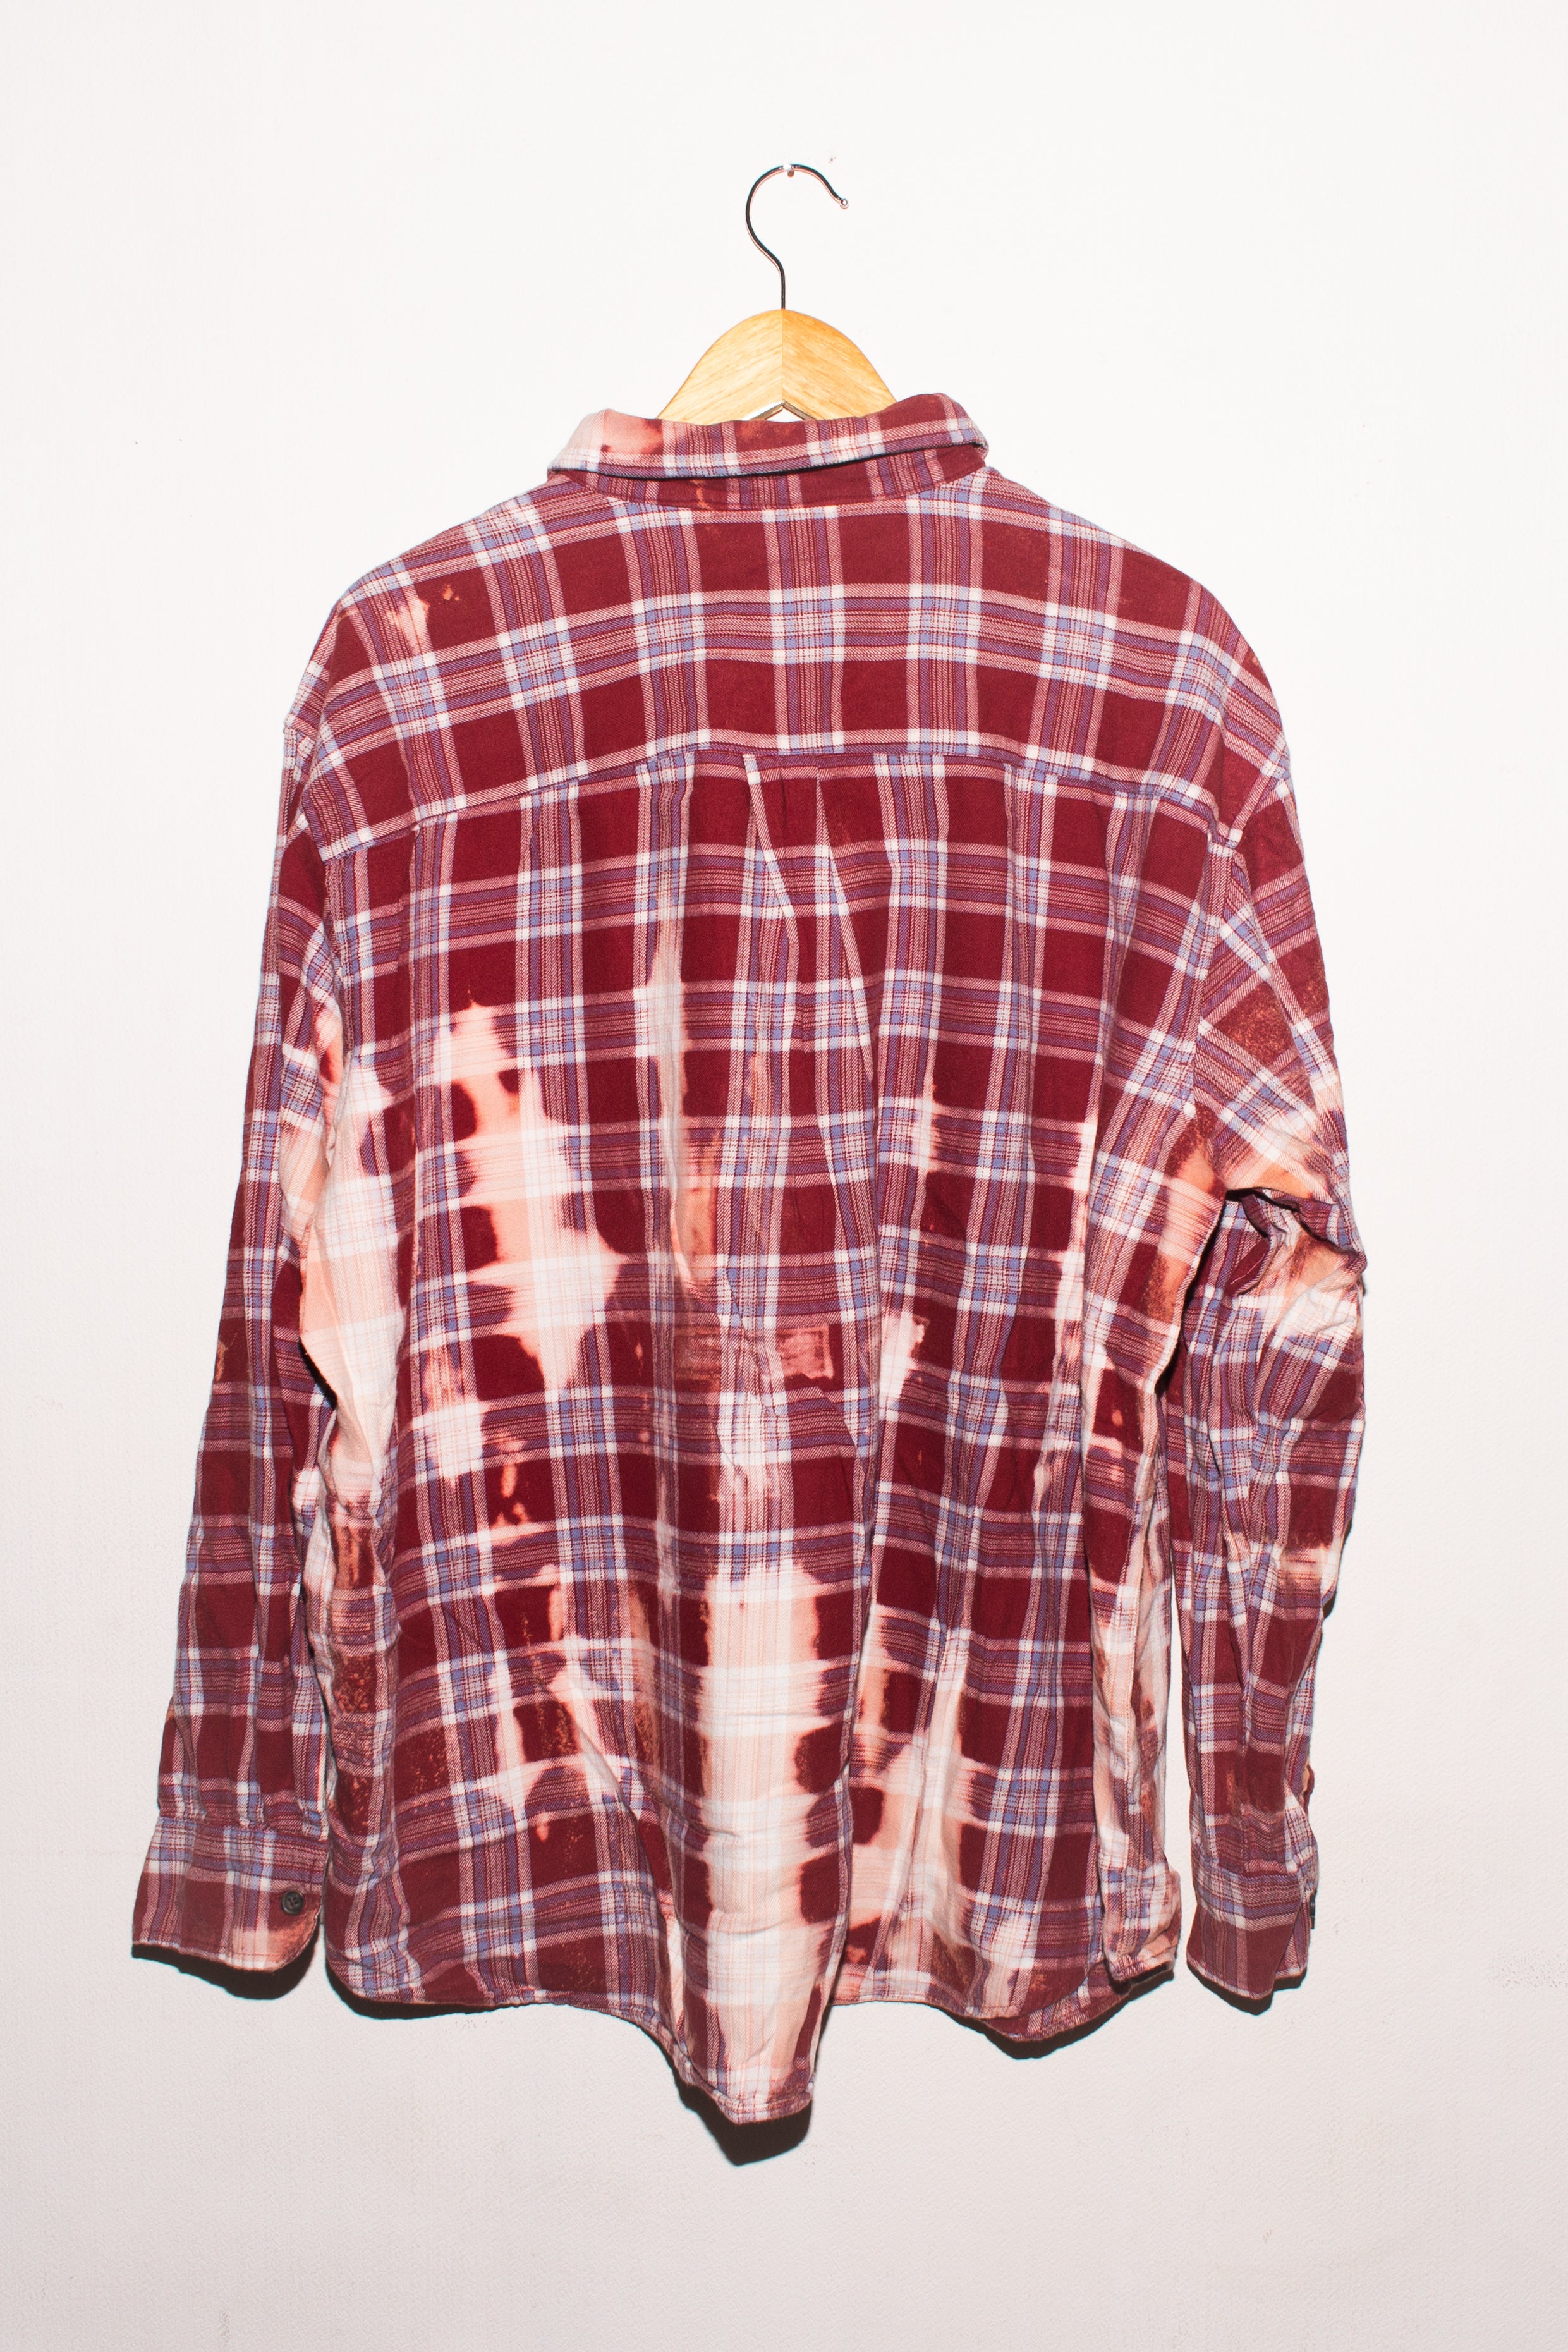 Foundry flannel